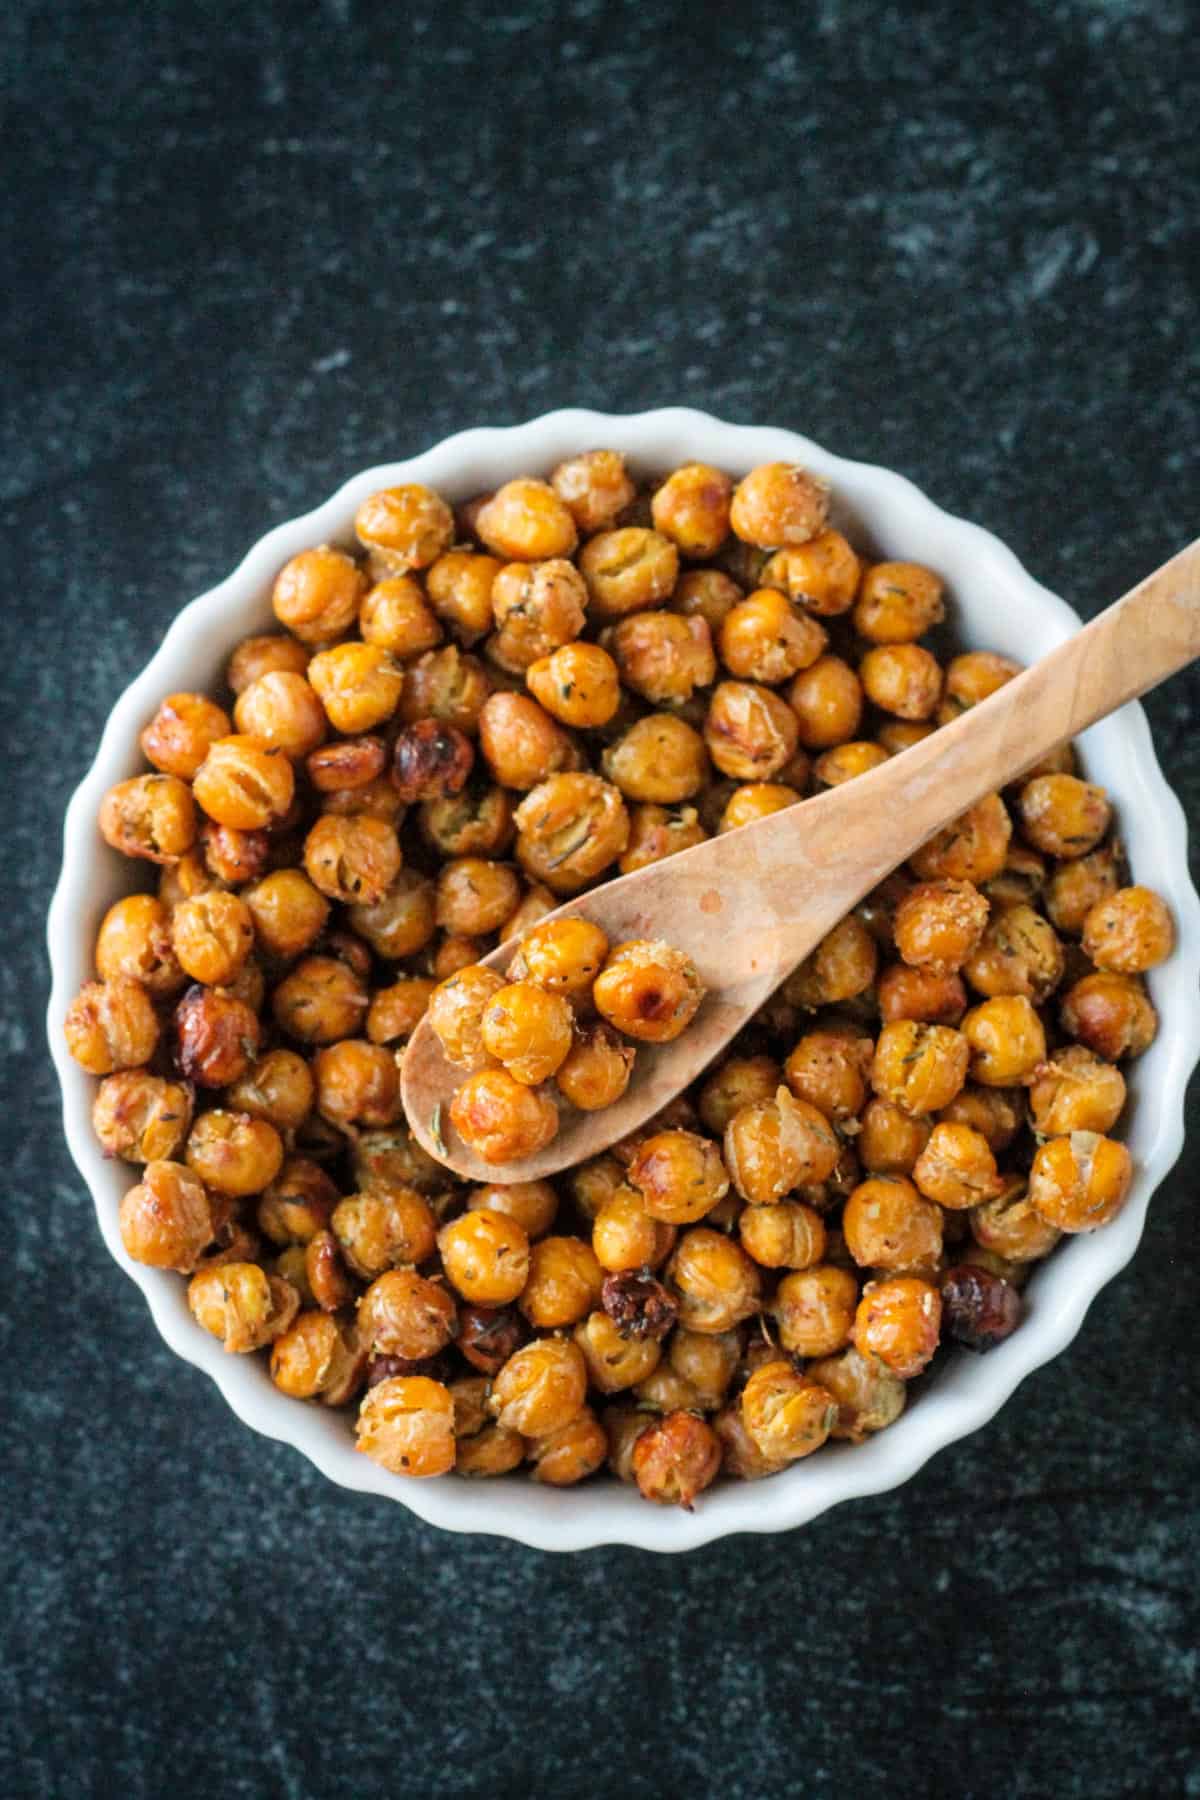 Seasoned roasted chickpeas in a bowl with a small wooden spoon.